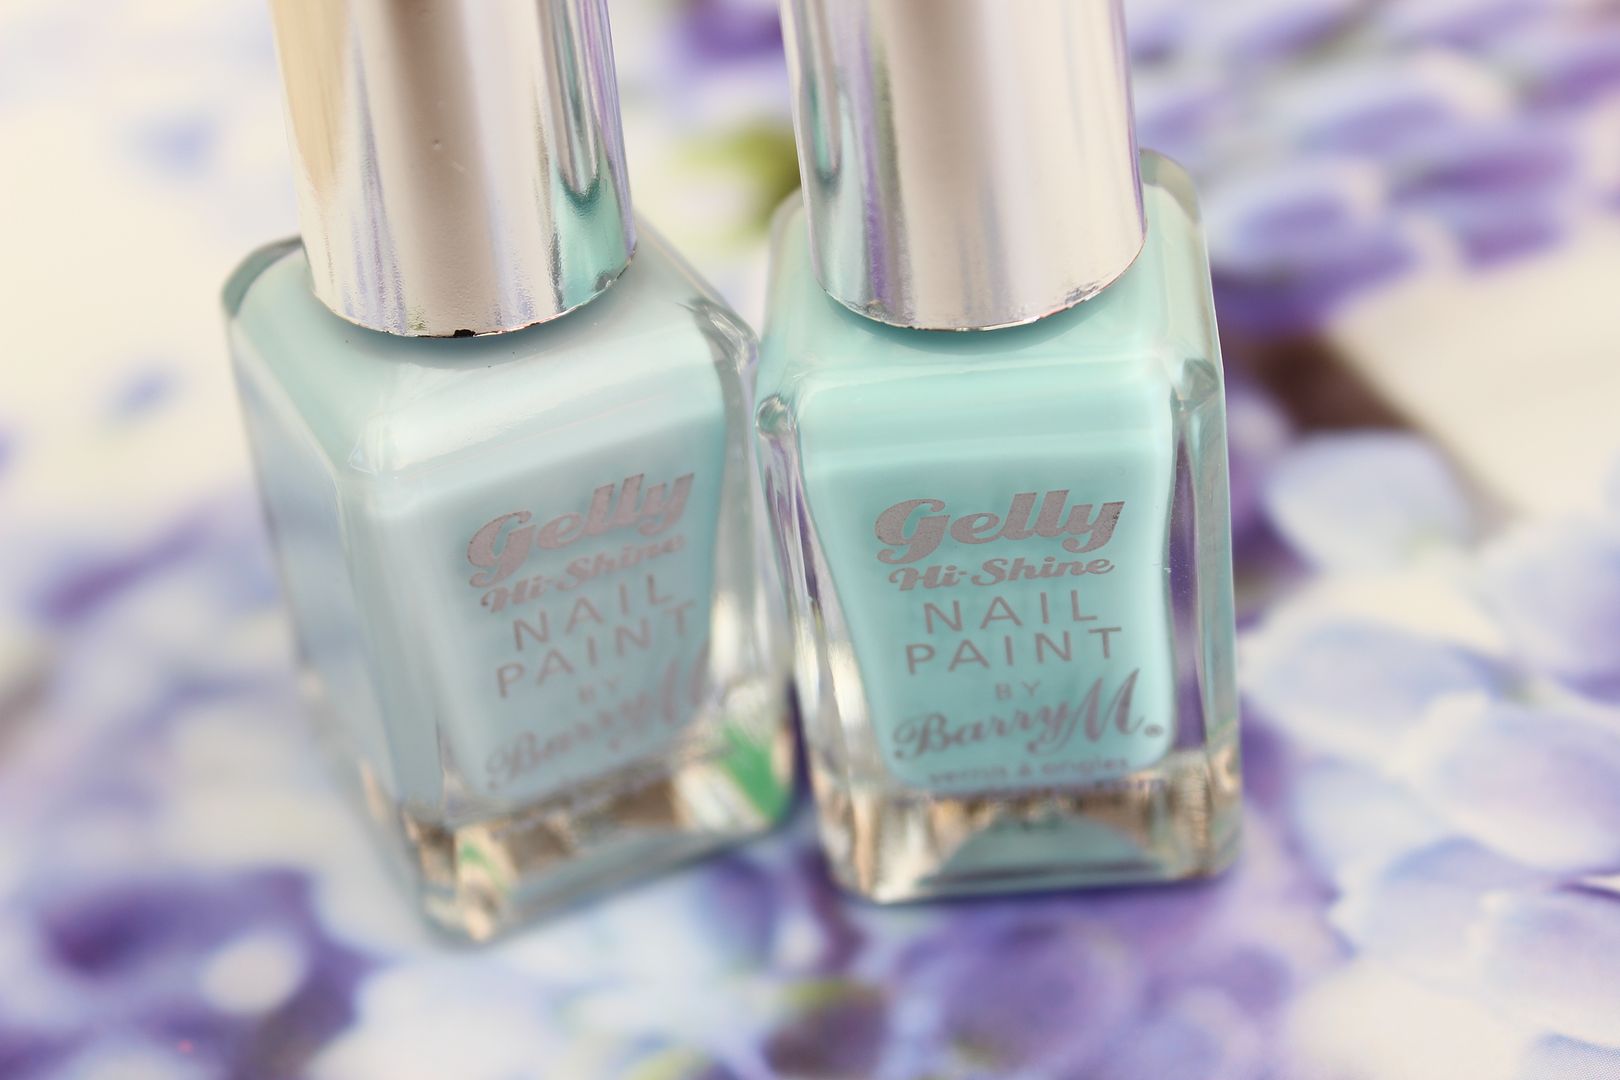 Barry M Gelly Polishes in Huckleberry and Sugar Apple